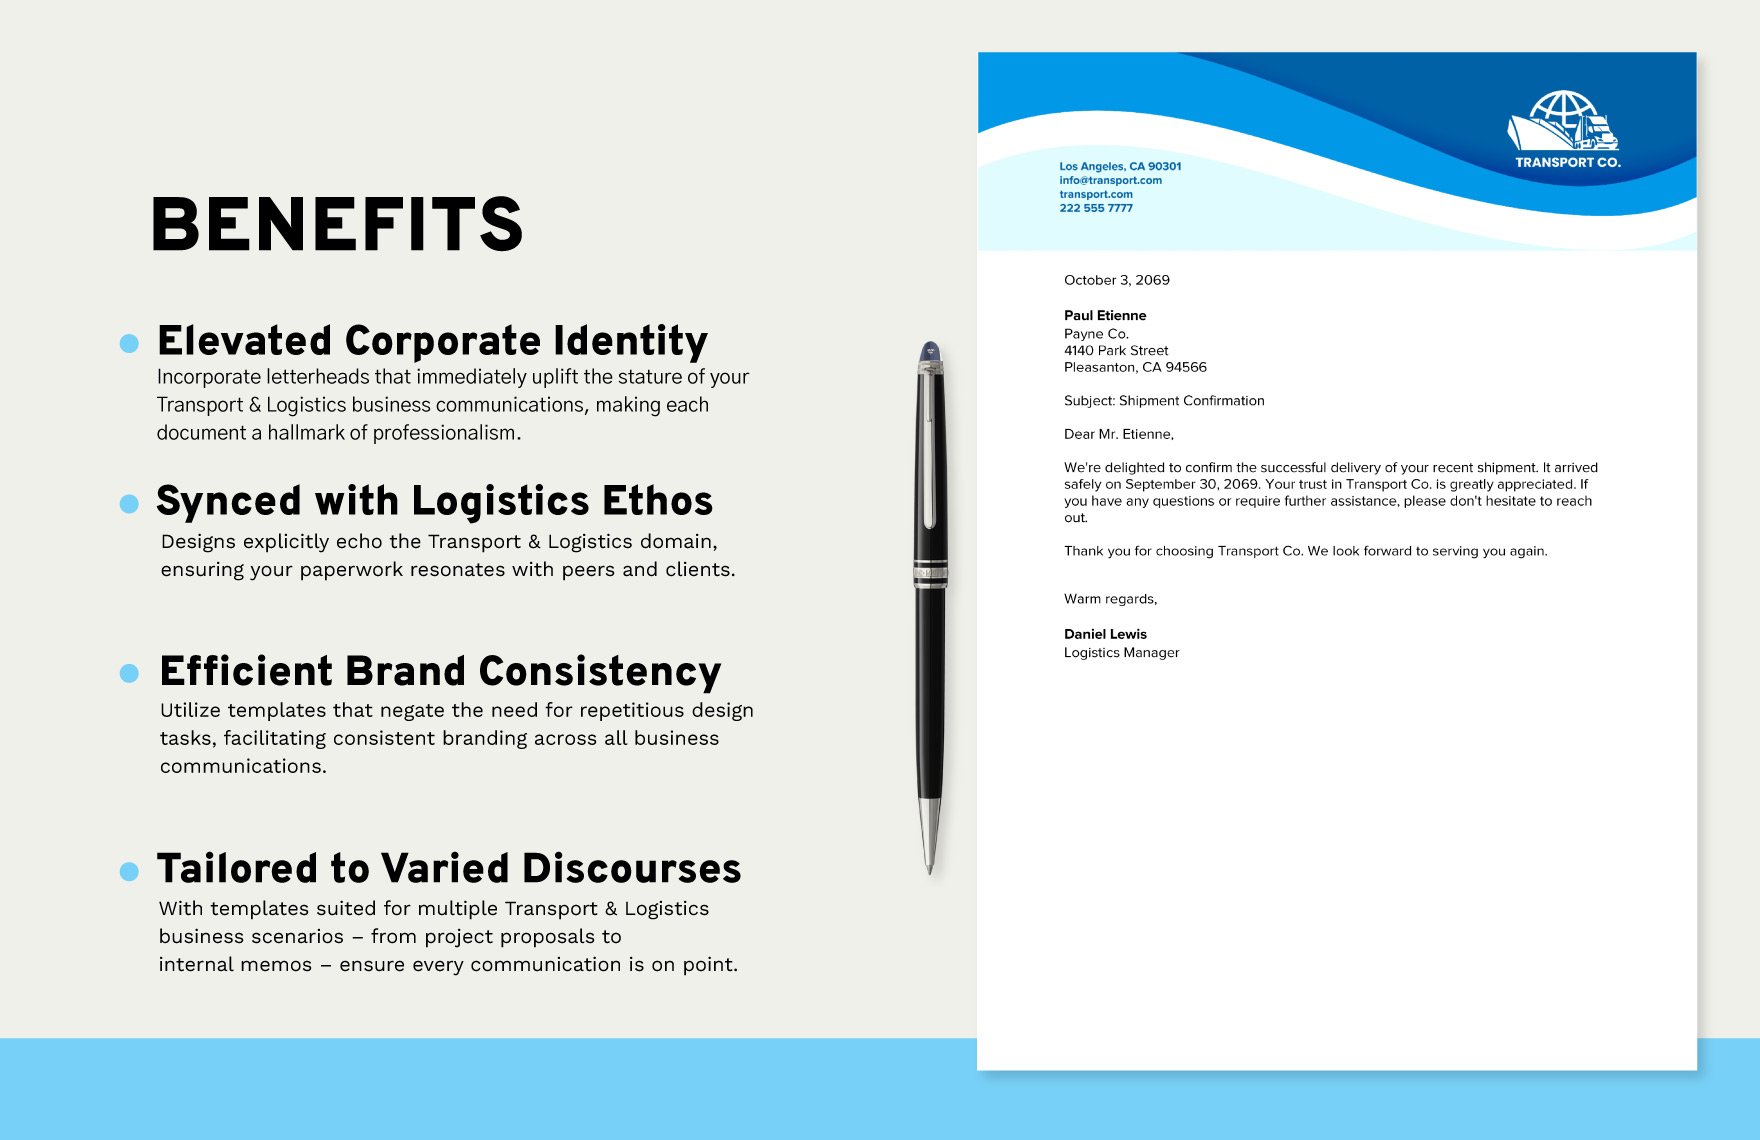 Transport and Logistics Freight Forwarding Company Letterhead Template